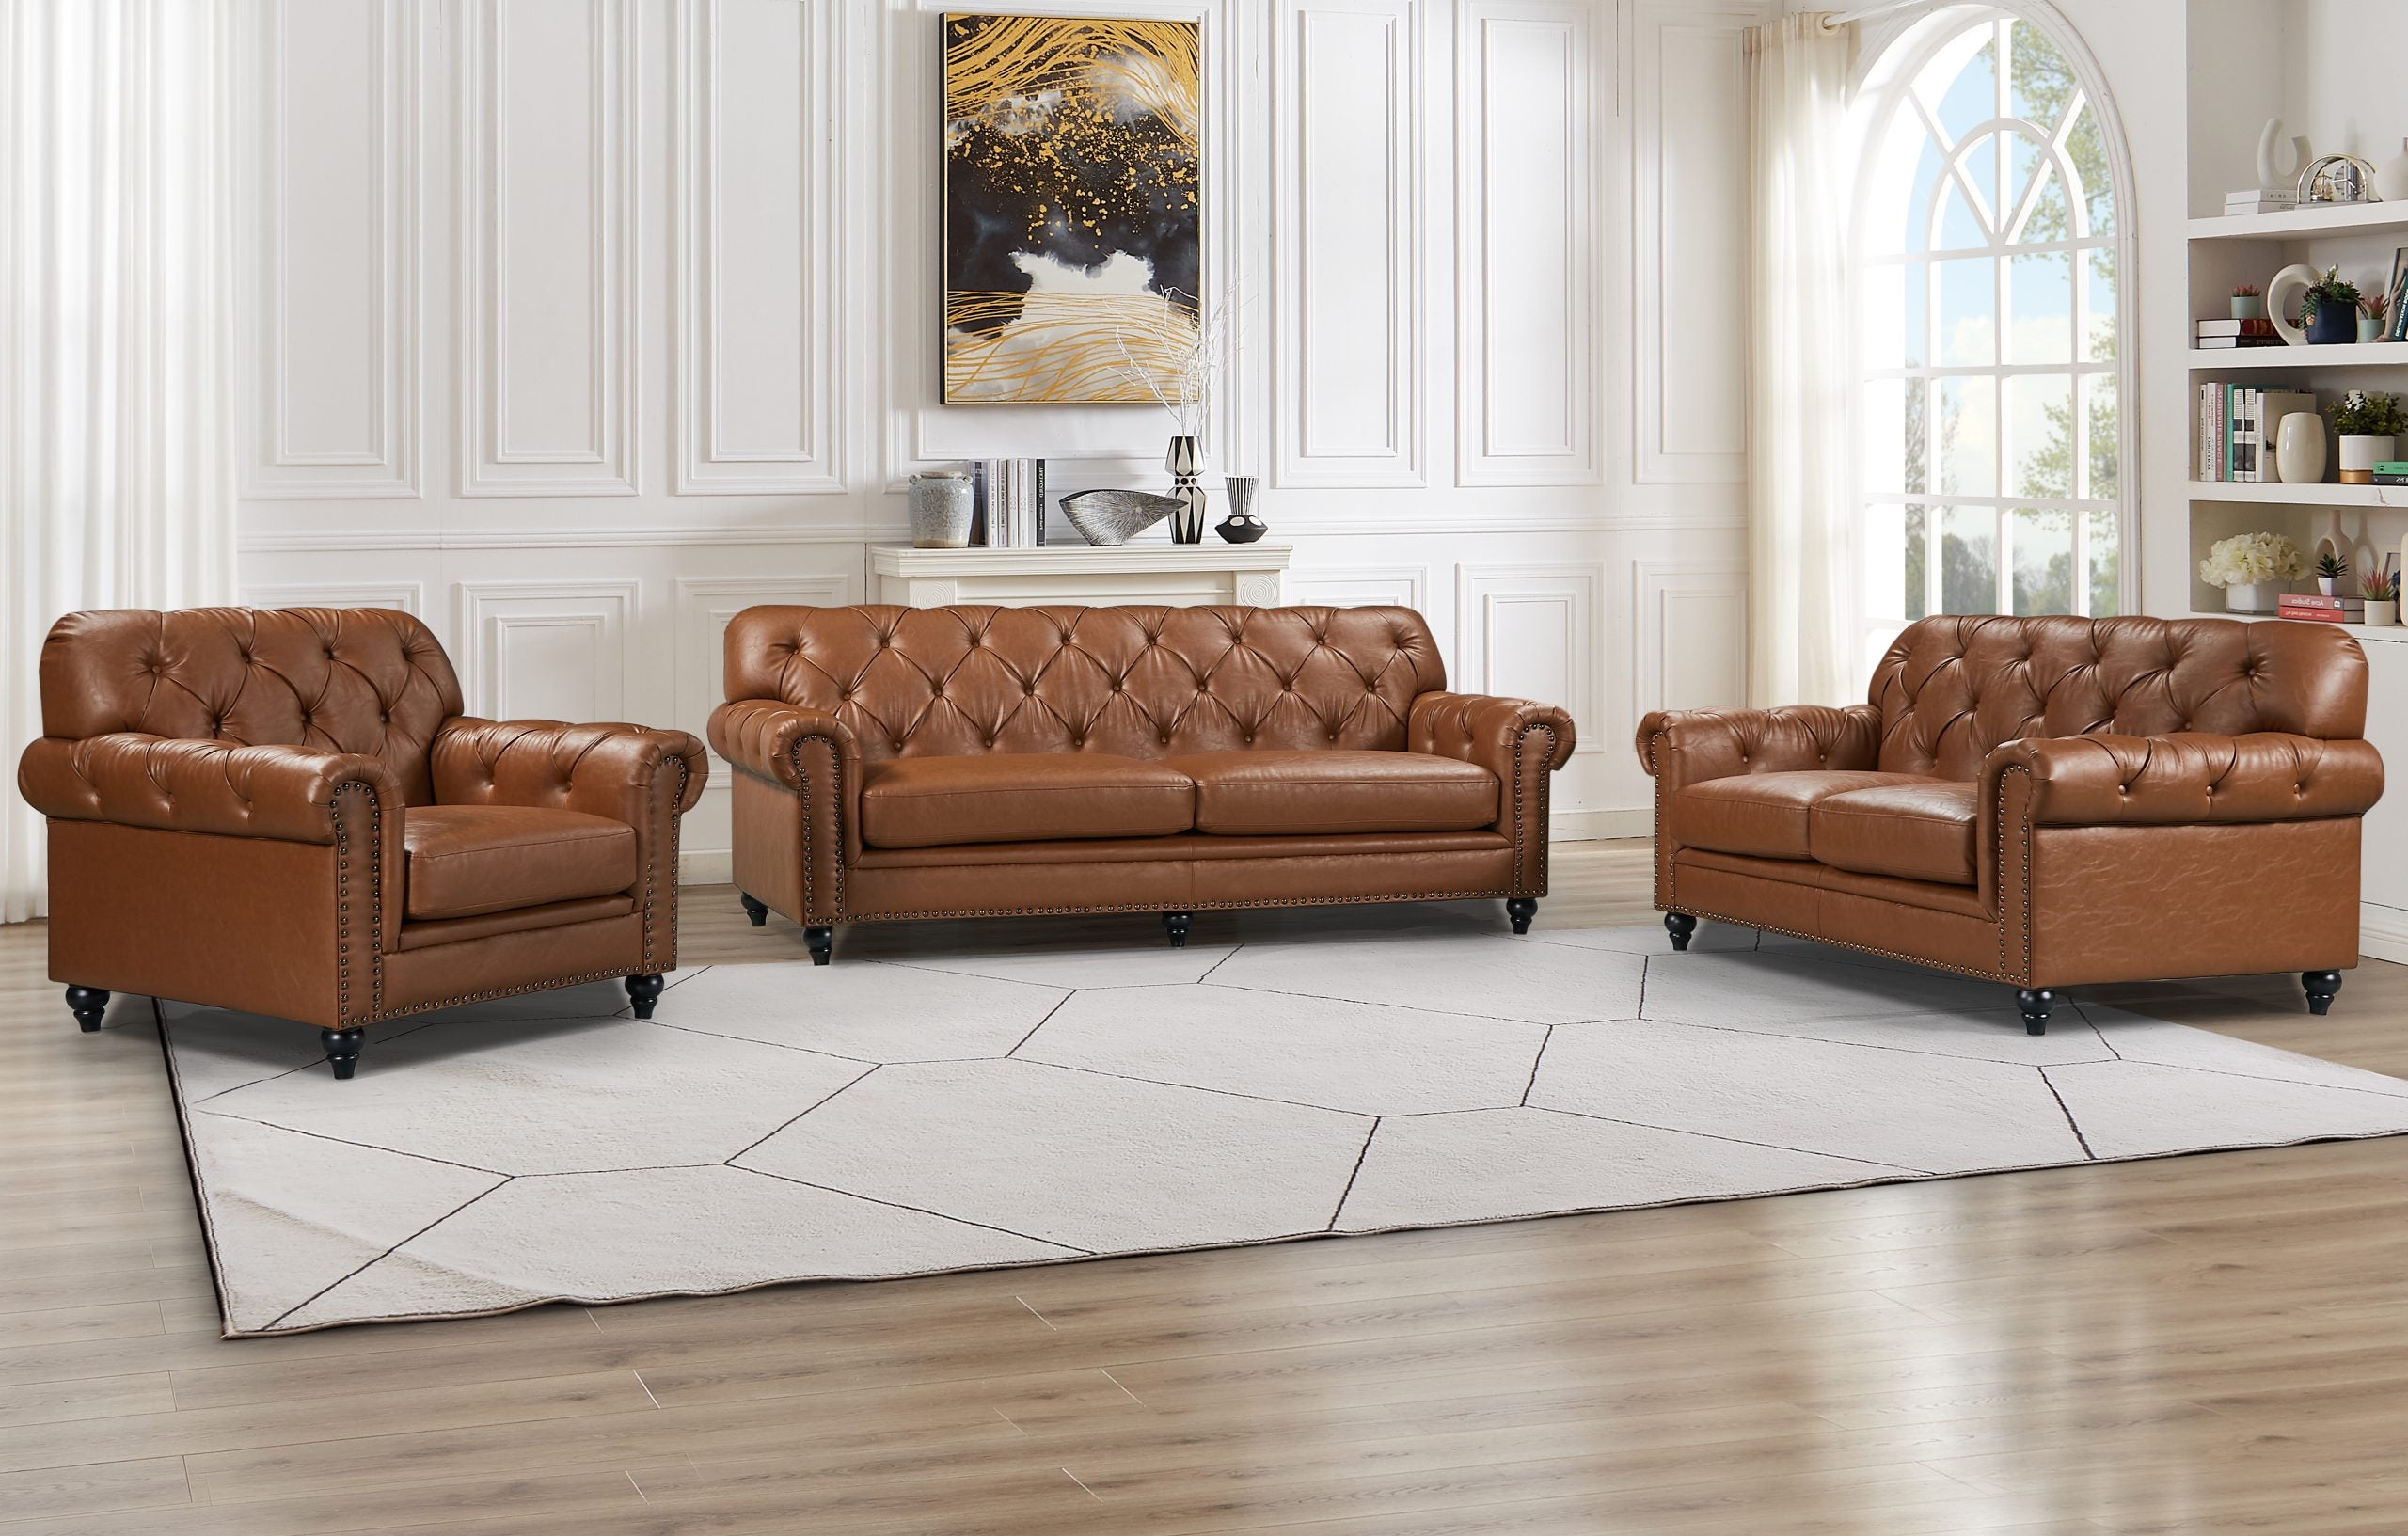 BT Barclay Chesterfield PU Leather Upholstered  2 Seater Sofa